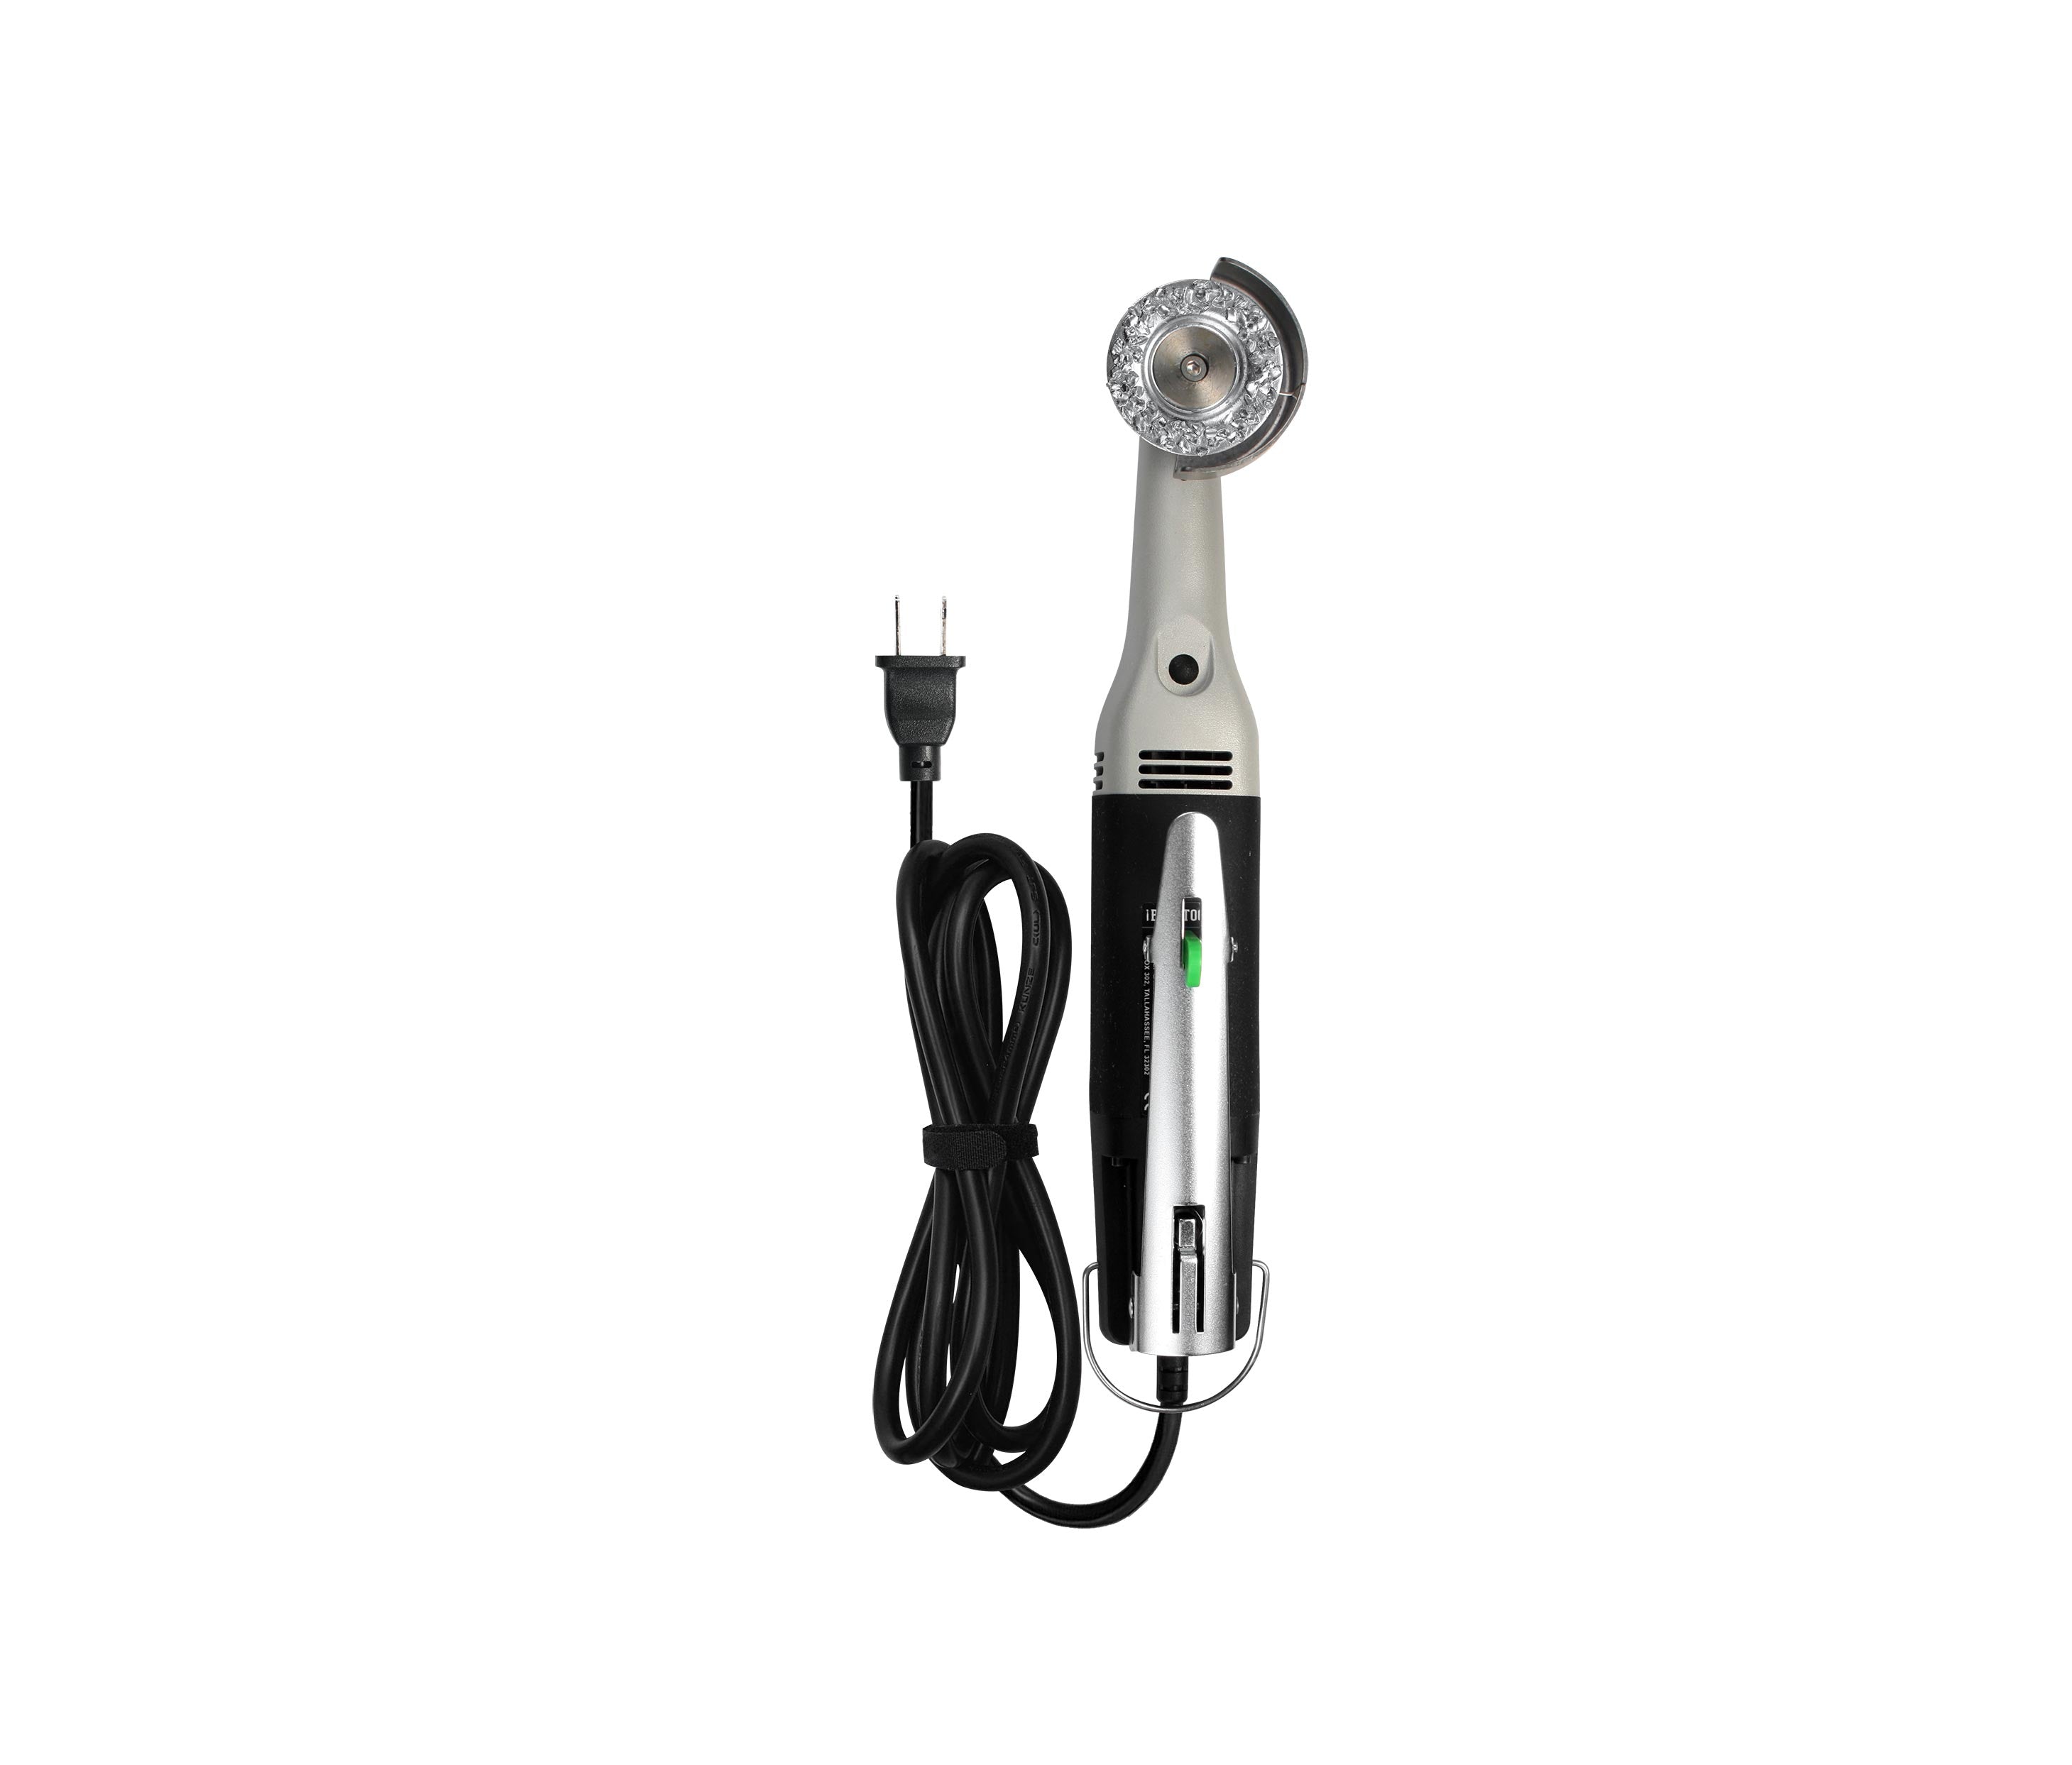 Basic Cow Hoof Care Electric Trimming Set